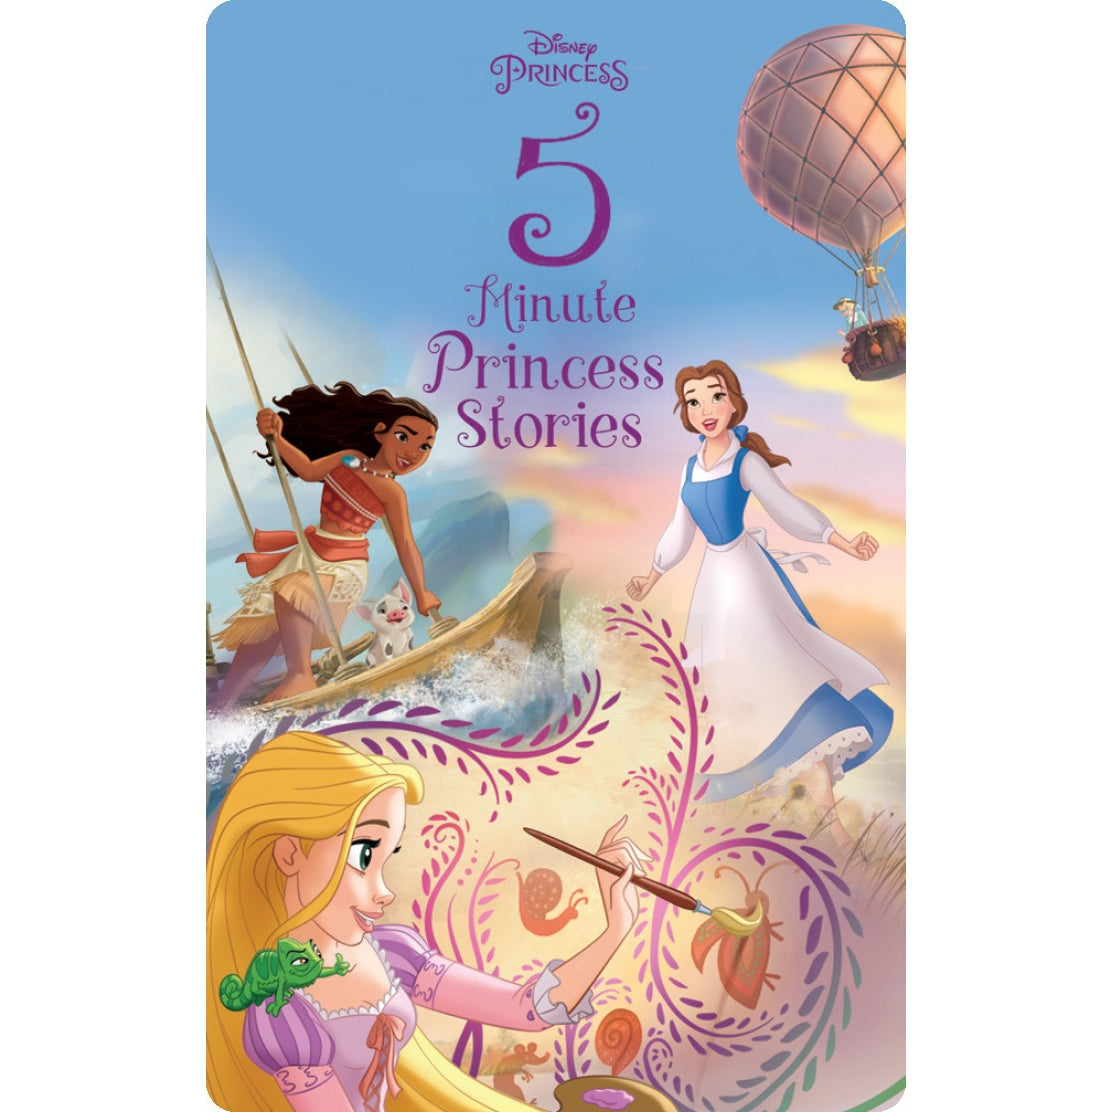 Yoto Card - Disney's 5 Minute Princess Stories - Child Friendly Audio Story Card for the Yoto Player